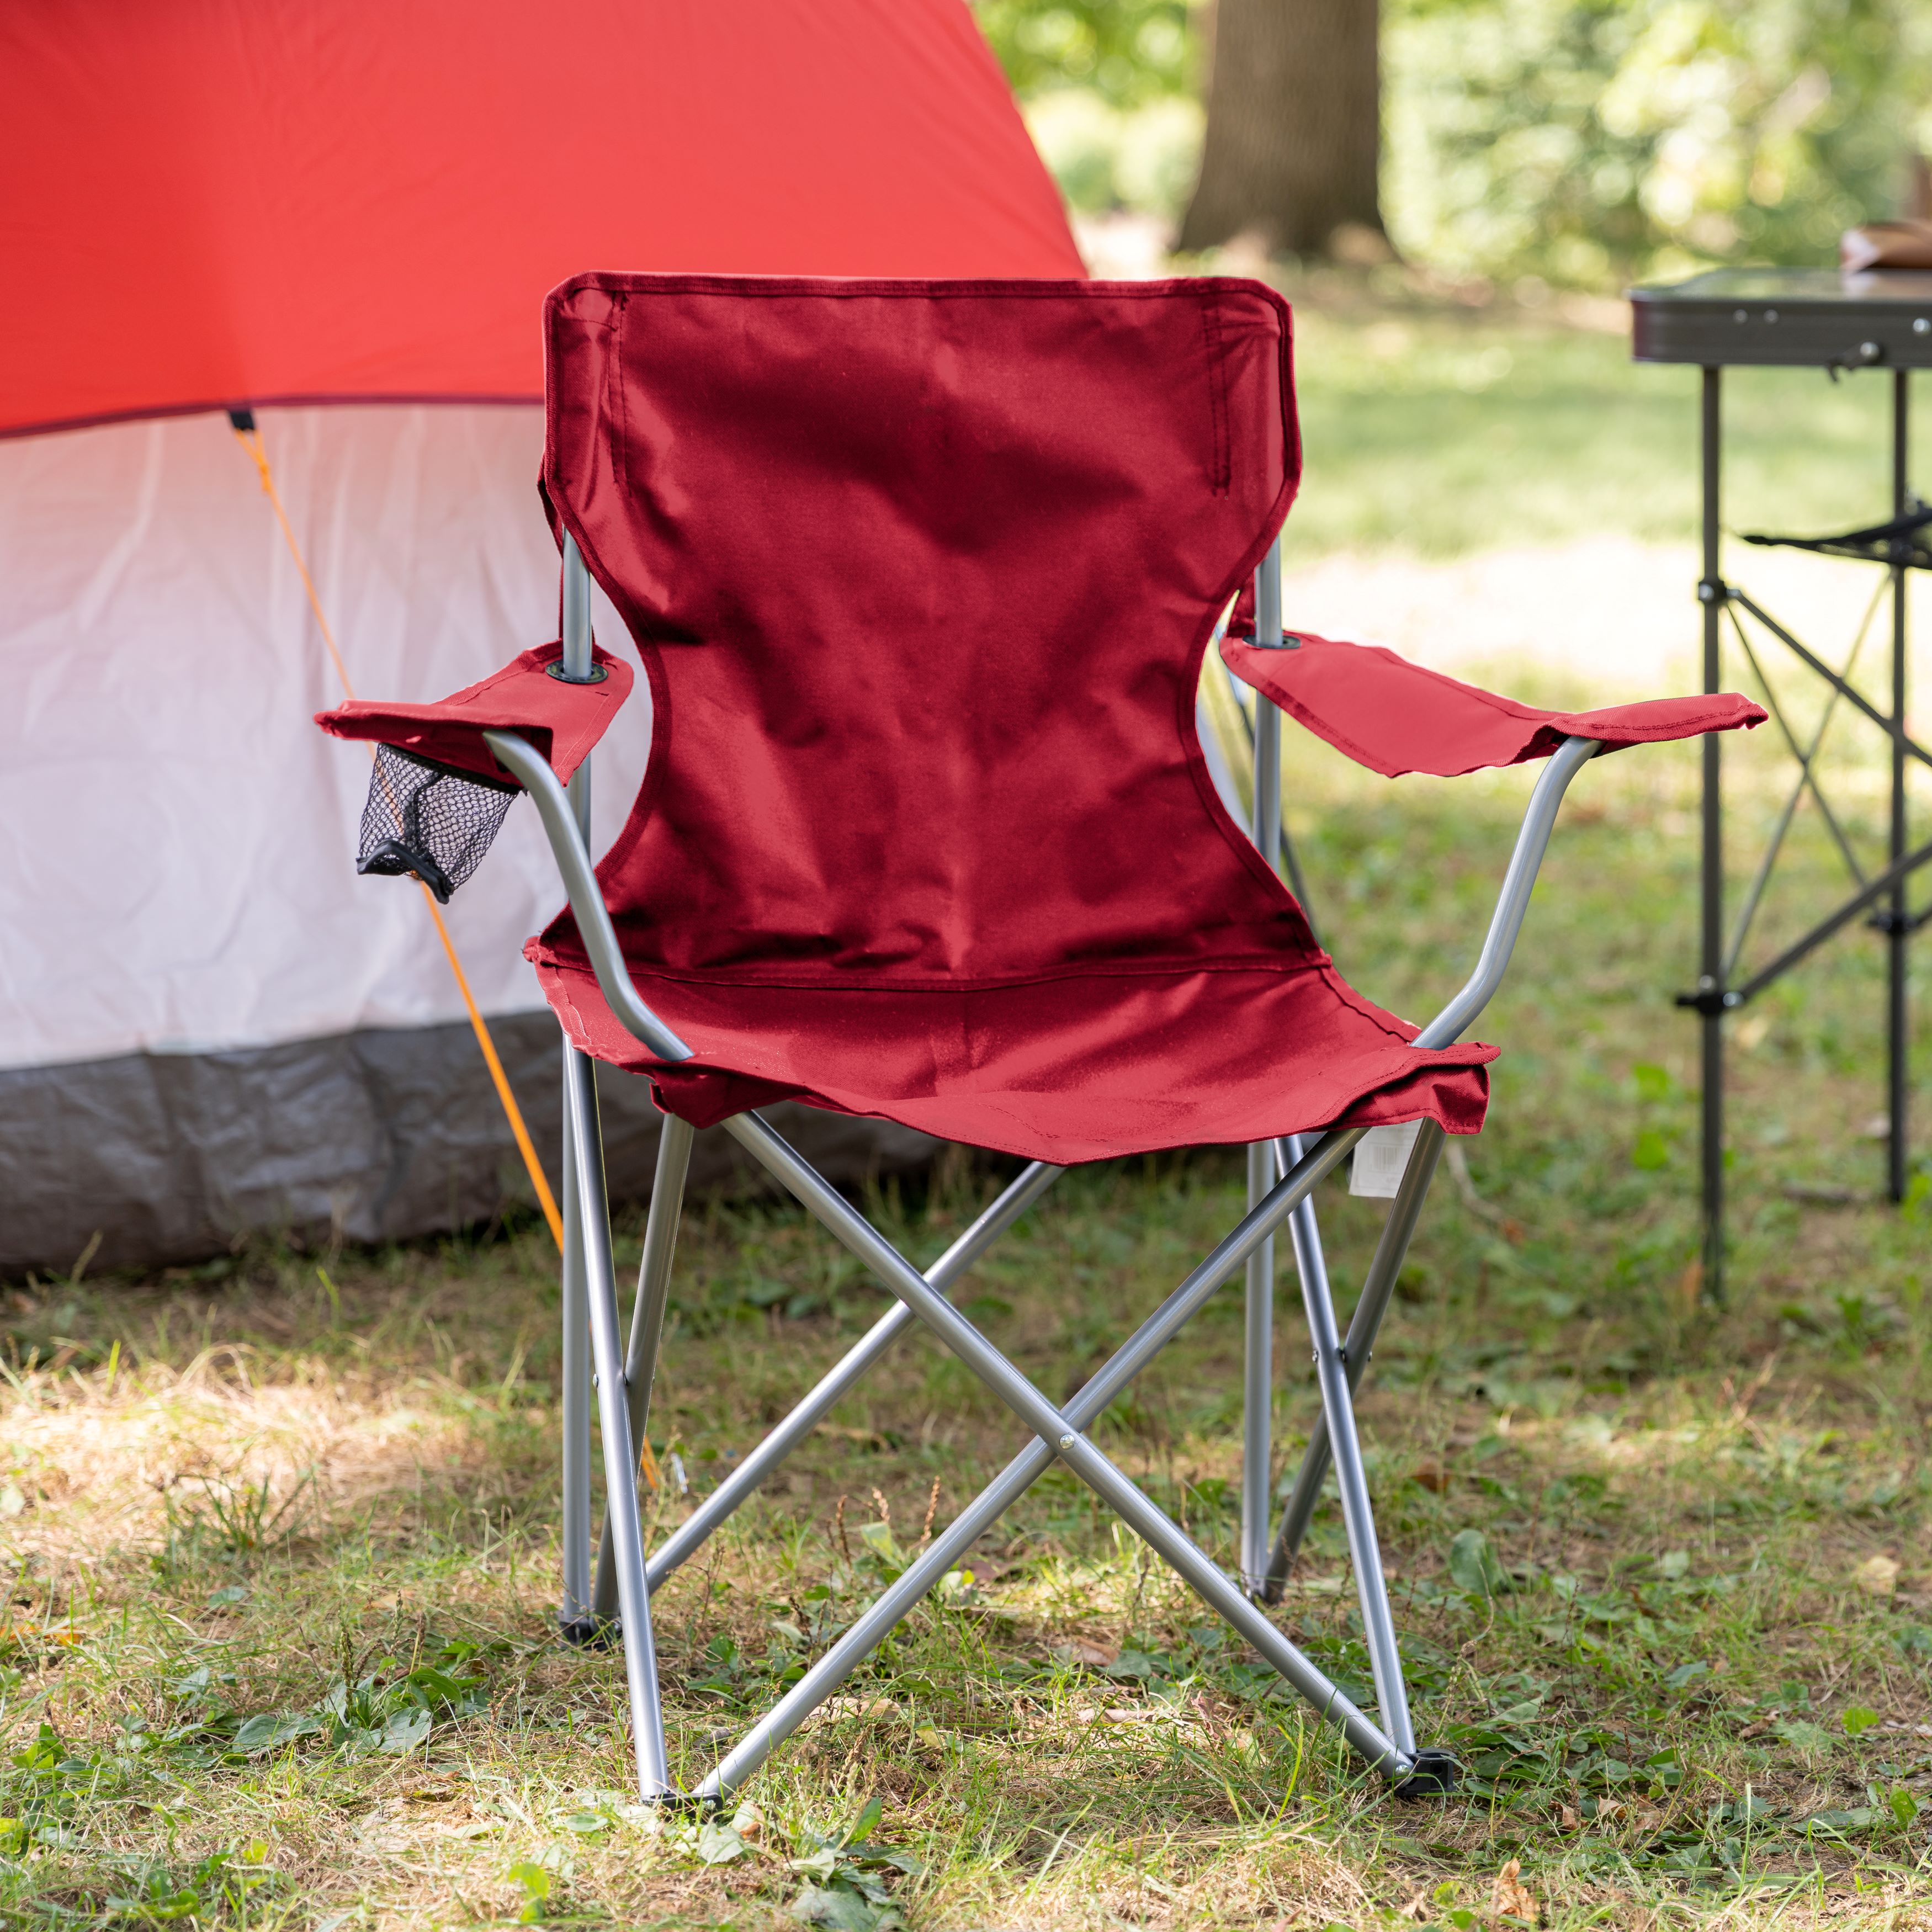 Ozark Trail Basic Quad Folding Camp Chair with Cup Holder, Red, Adult - image 3 of 12